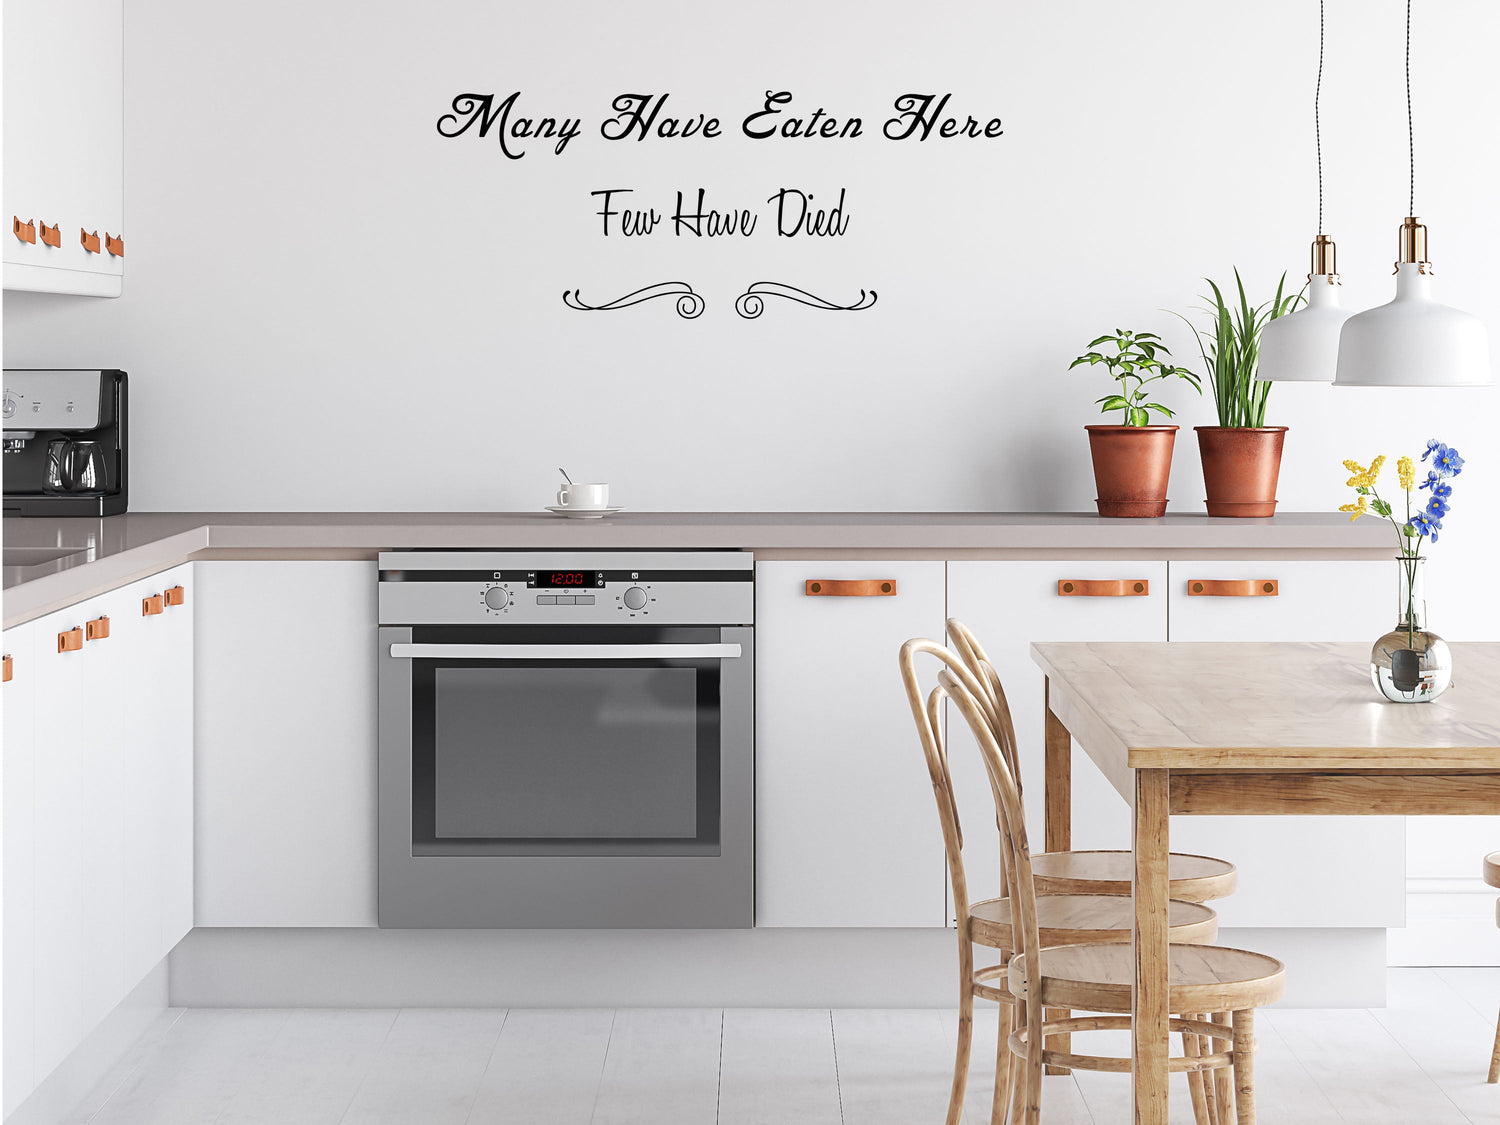 Many Have Eaten Here Wall Decal For Kitchen - Dining Room Wall Sticker - Kitchen Decor - Dining Room Decor - Dining Room Vinyl Lettering Vinyl Wall Decal Title Done 